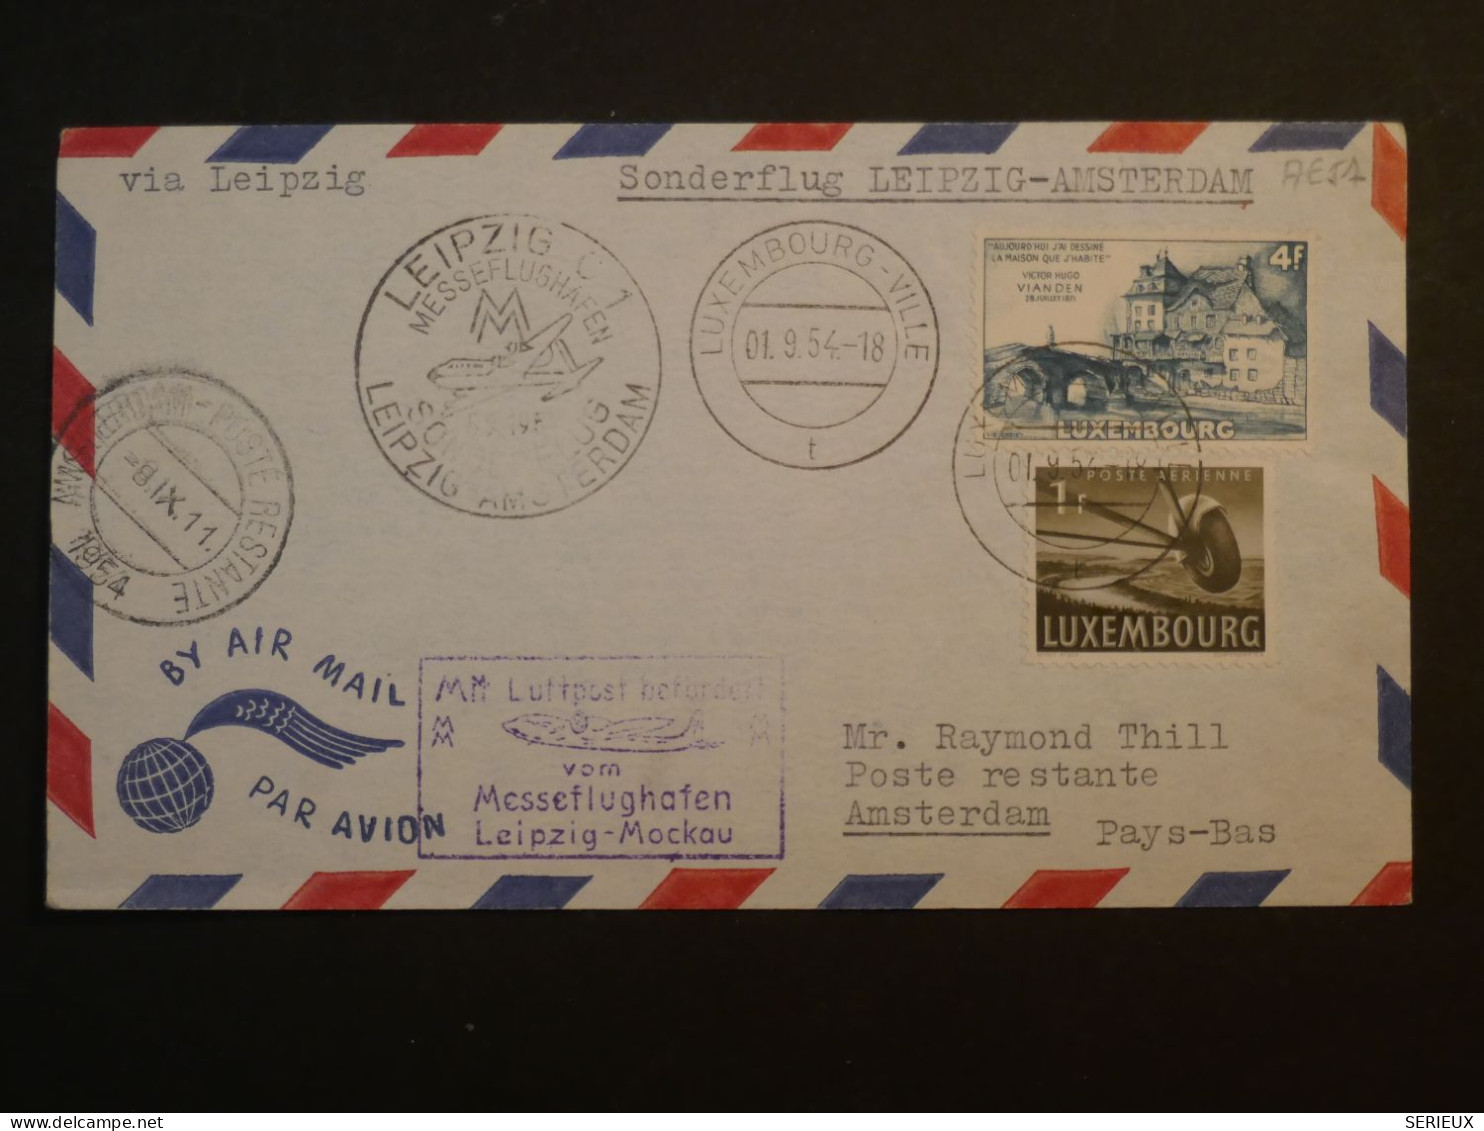 DF14  LUXEMBOURG  BELLE  LETTRE  1953 SONDERFLUGT LEIPZIG AMSTERDAM PAYS BAS  +AFF. INTERESSANT+++++ - Covers & Documents